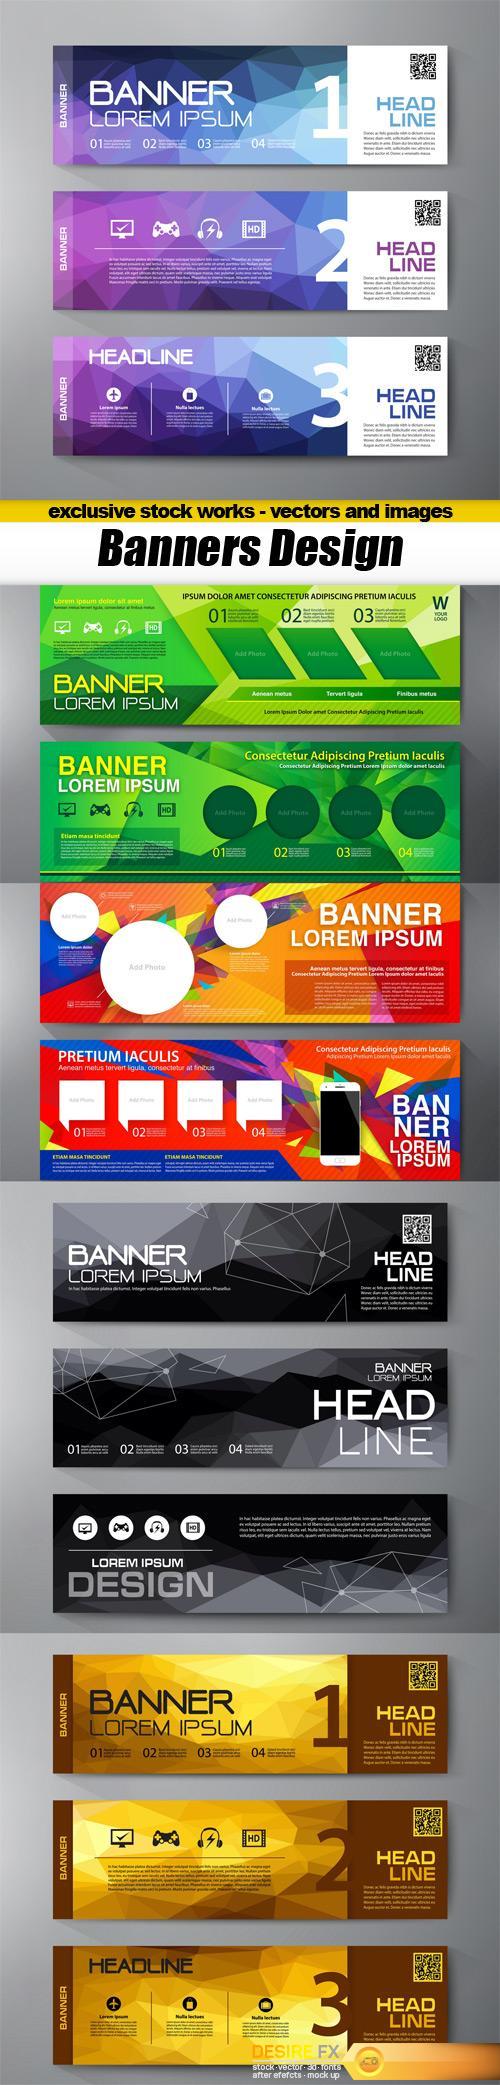 Banners Design - 5x EPS